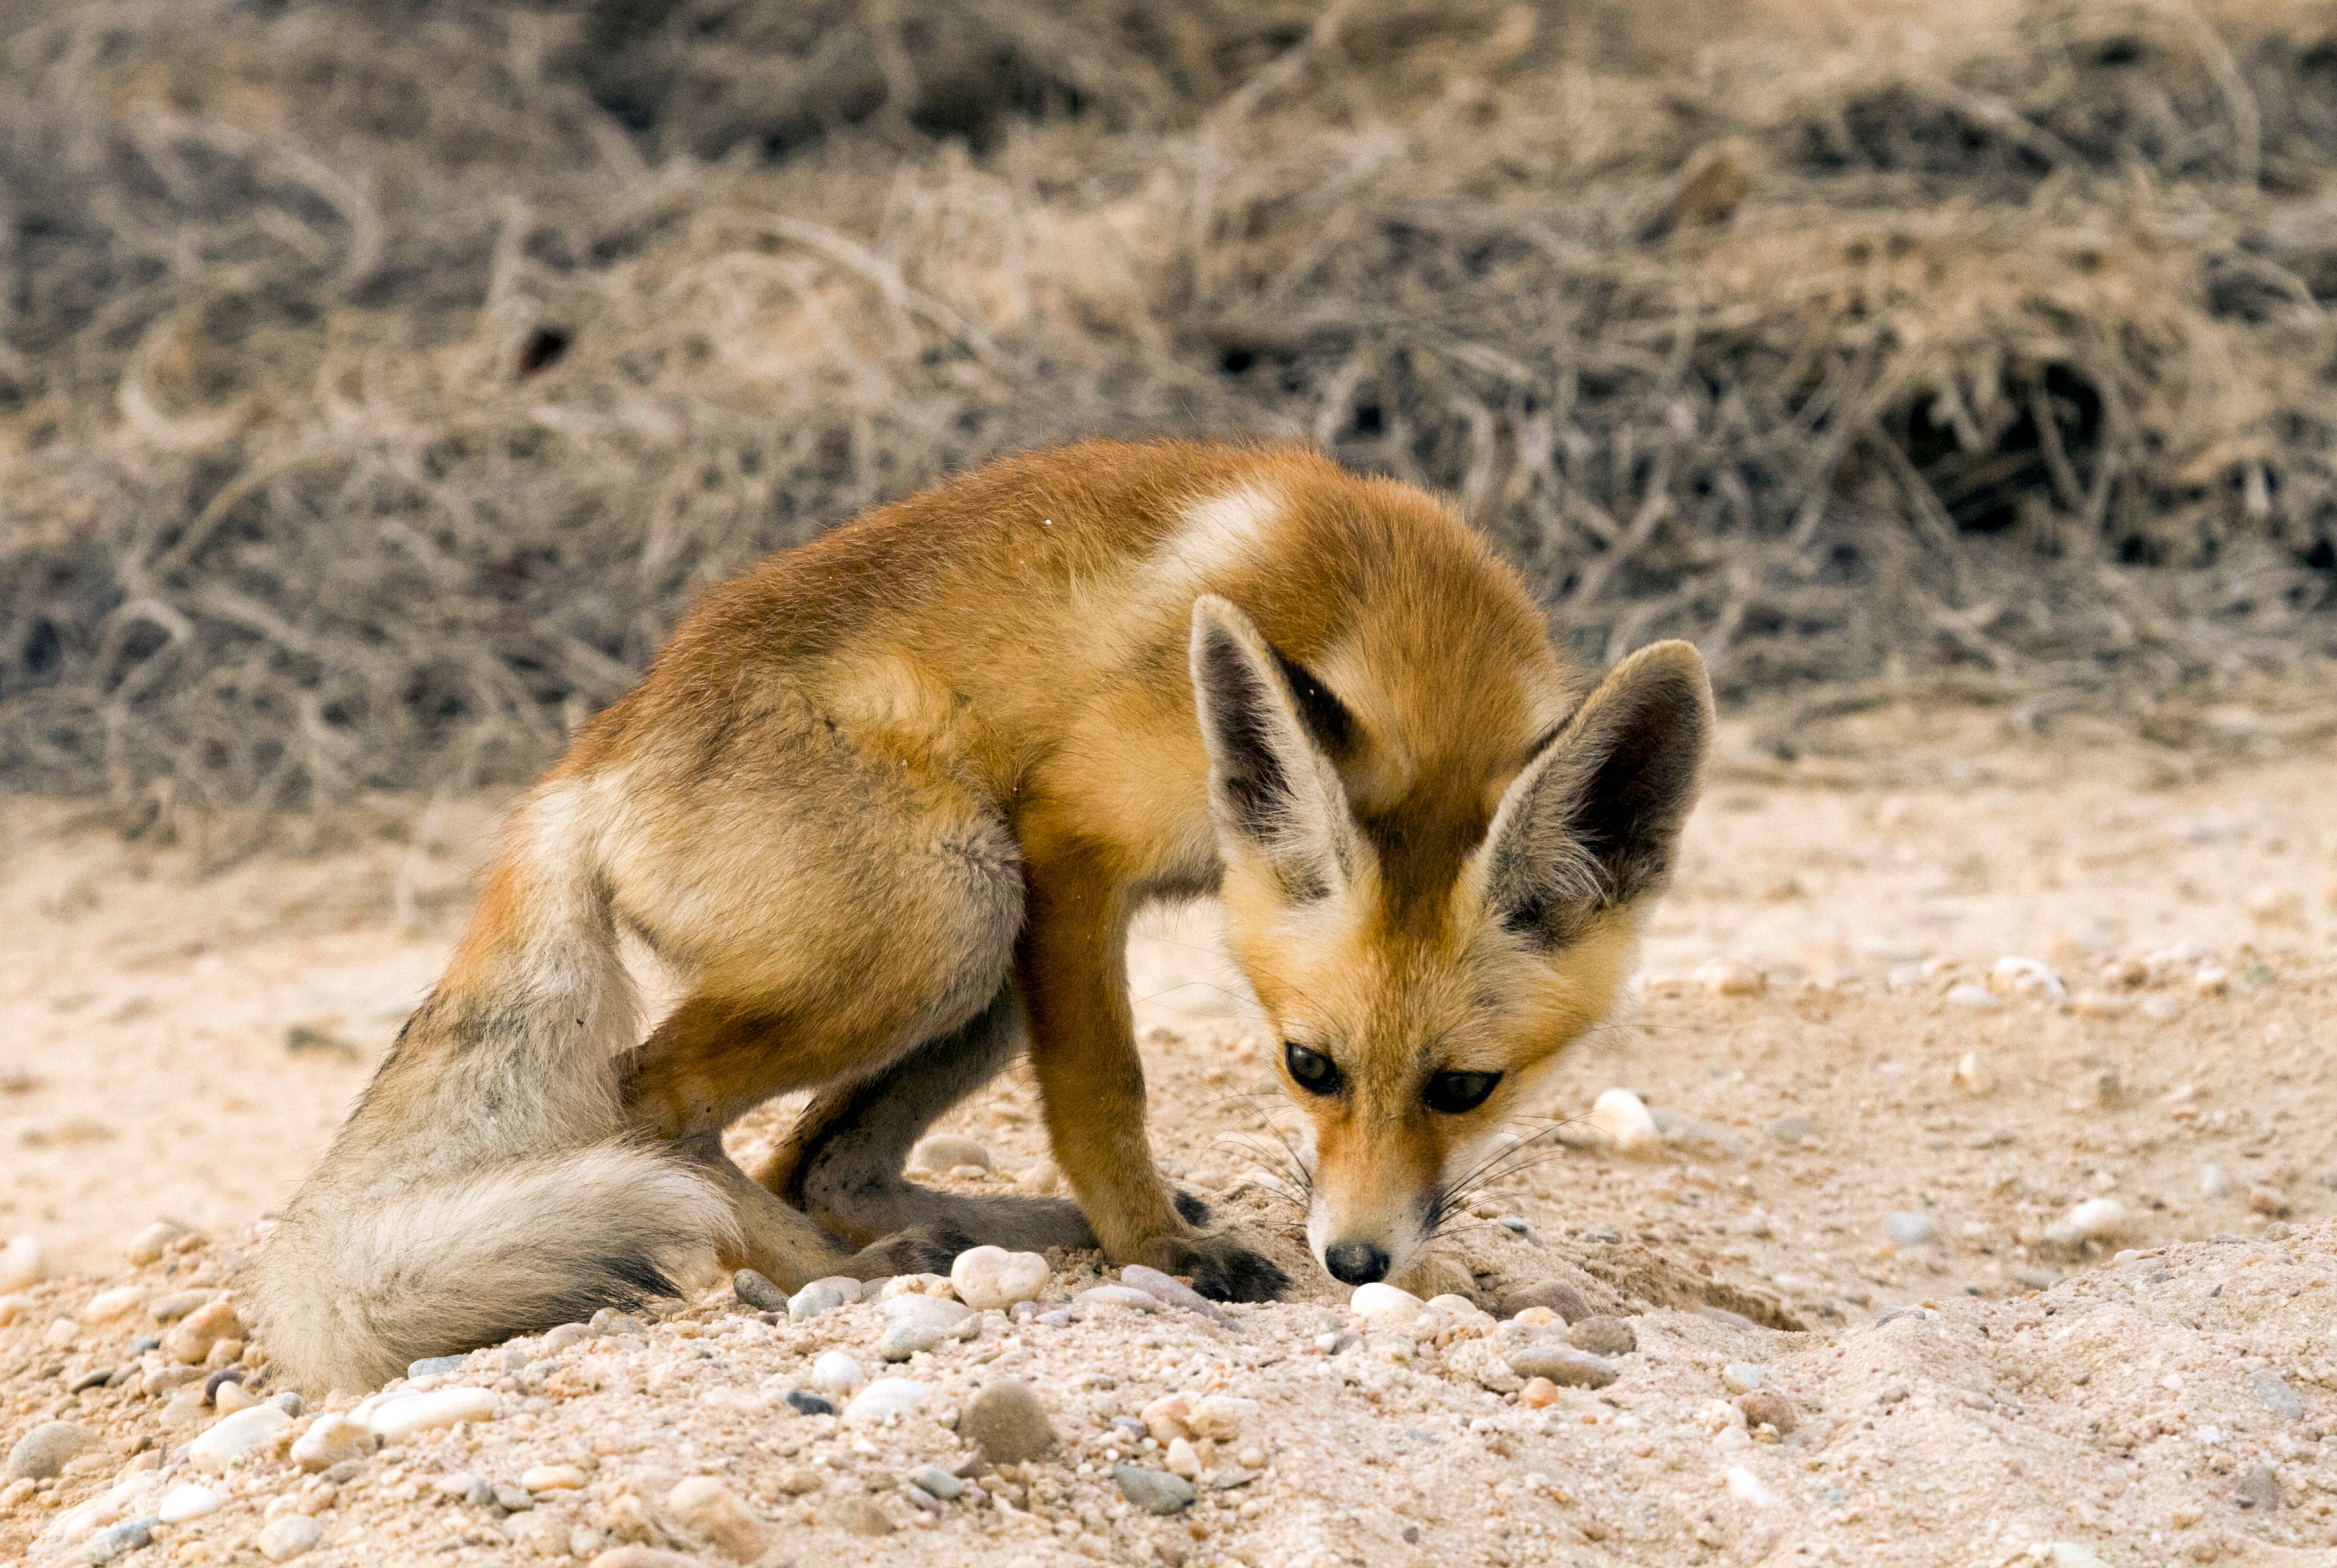 An Arabian red fox emerges from its burrow